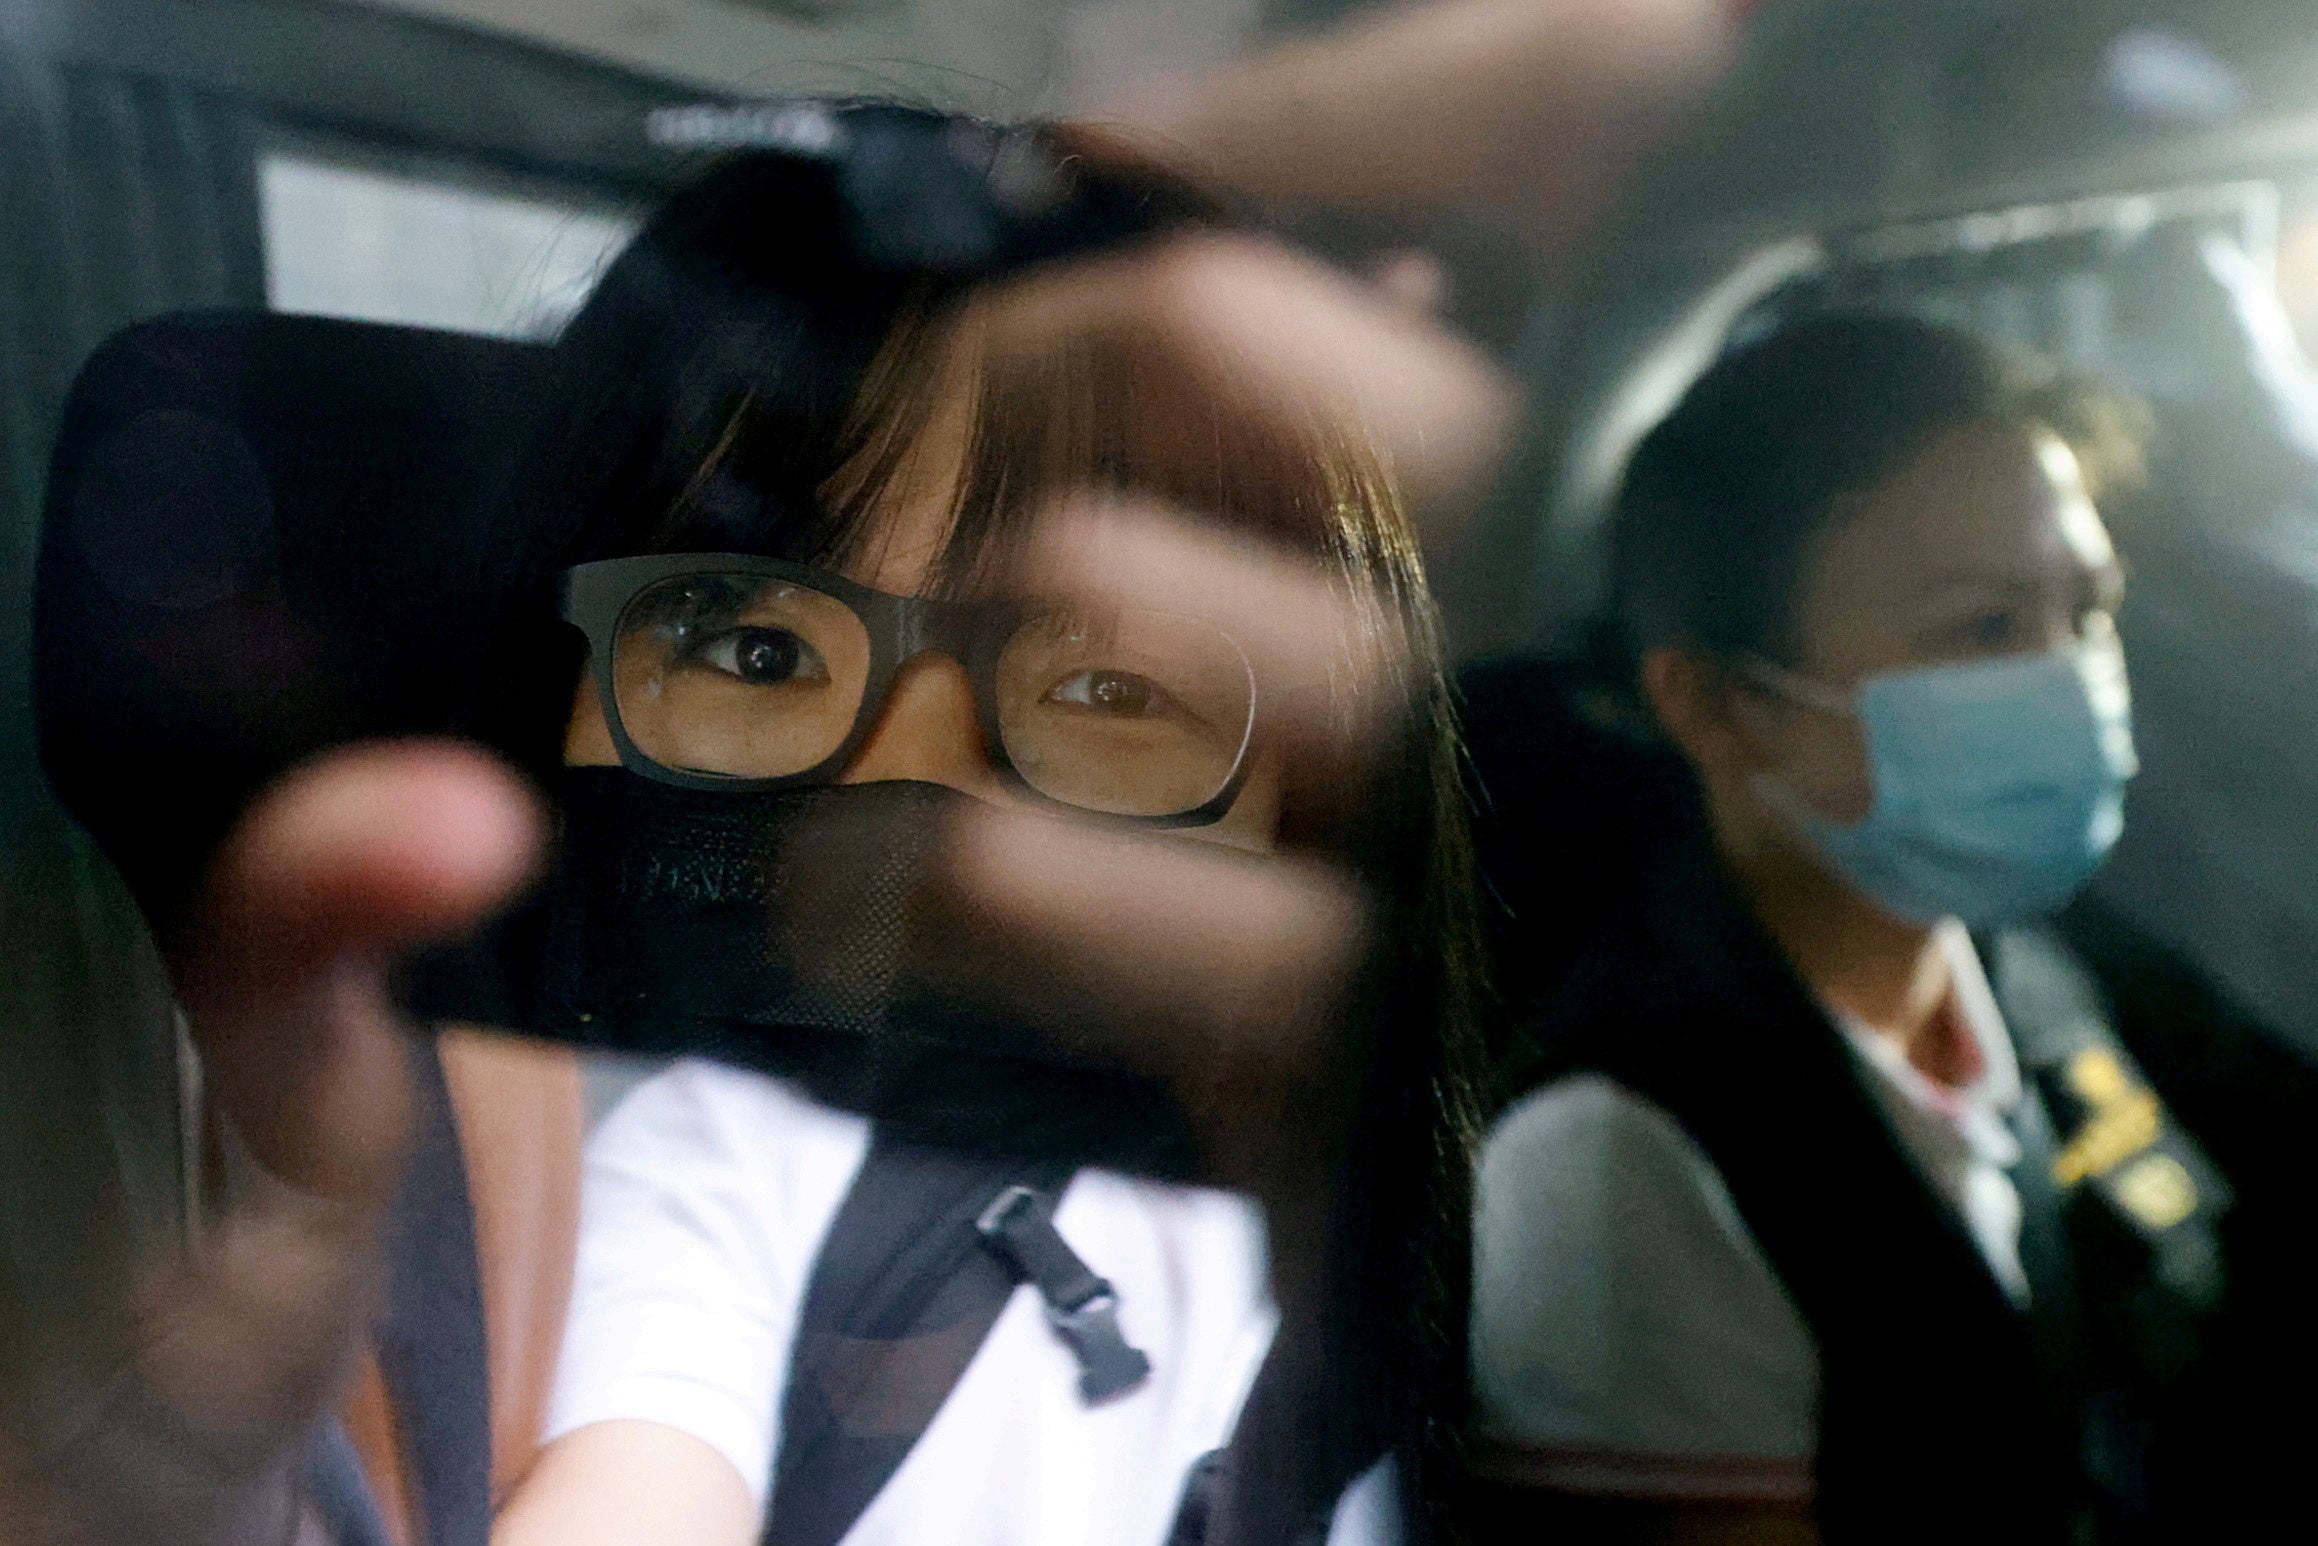 Hong Kong Alliance Vice-Chairwoman Tonyee Chow was seen inside a vehicle after being detained in Hong Kong